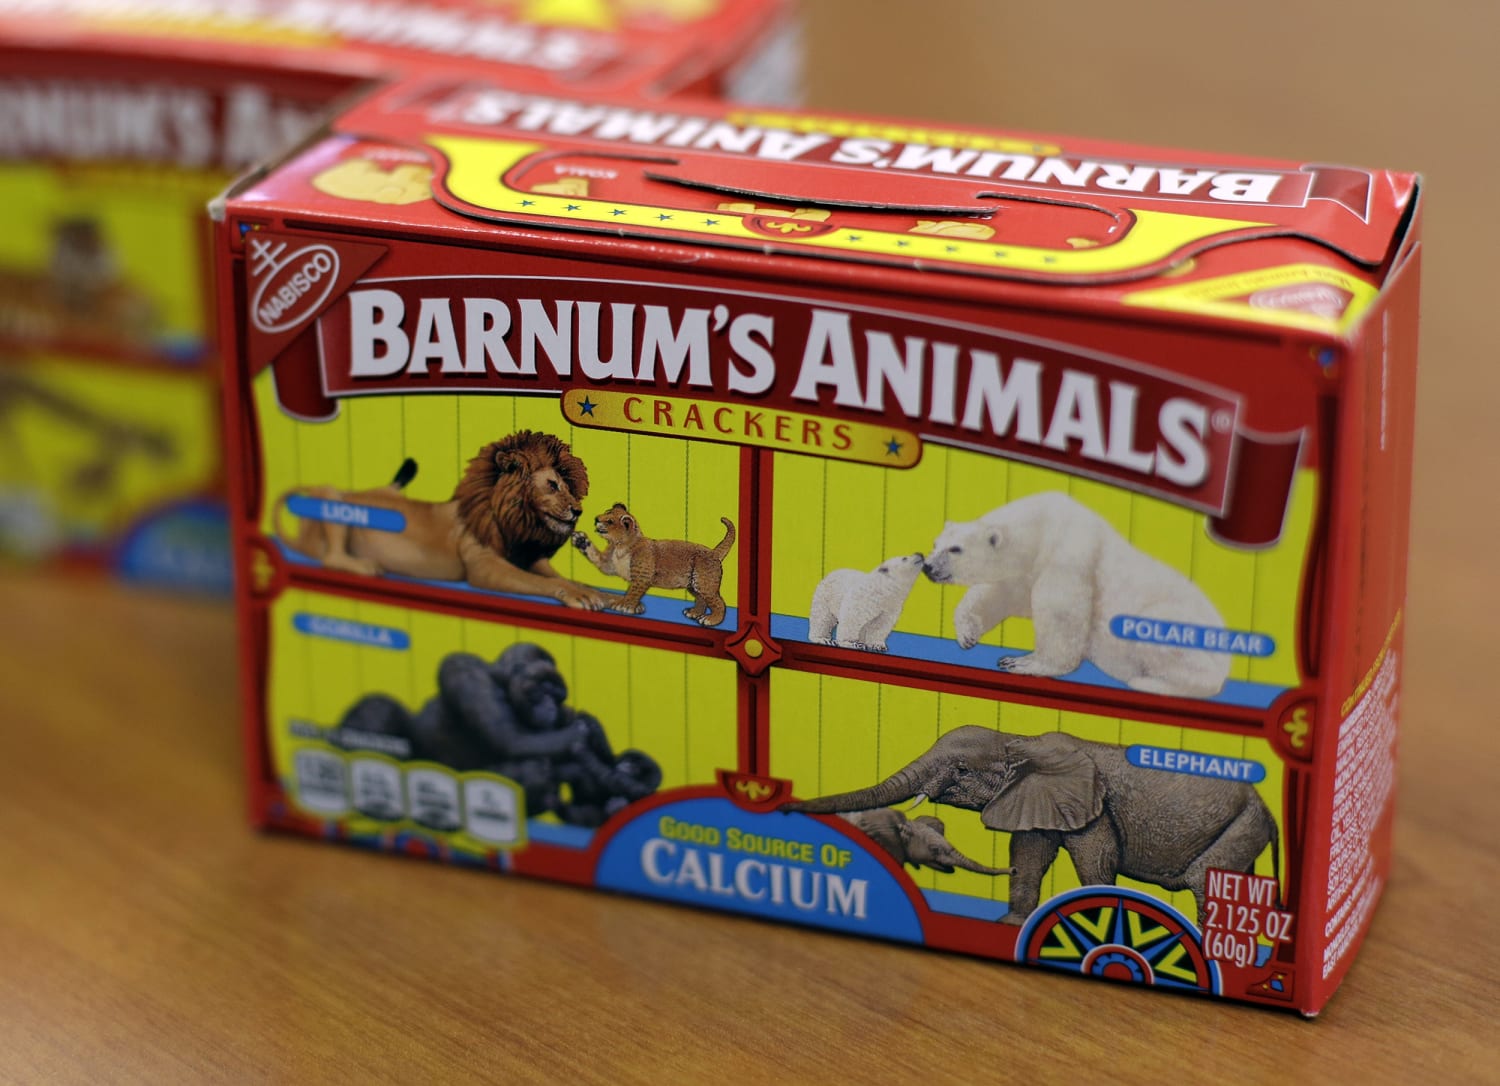 Nabisco animal crackers boxes got a makeover and now the animals are  roaming free